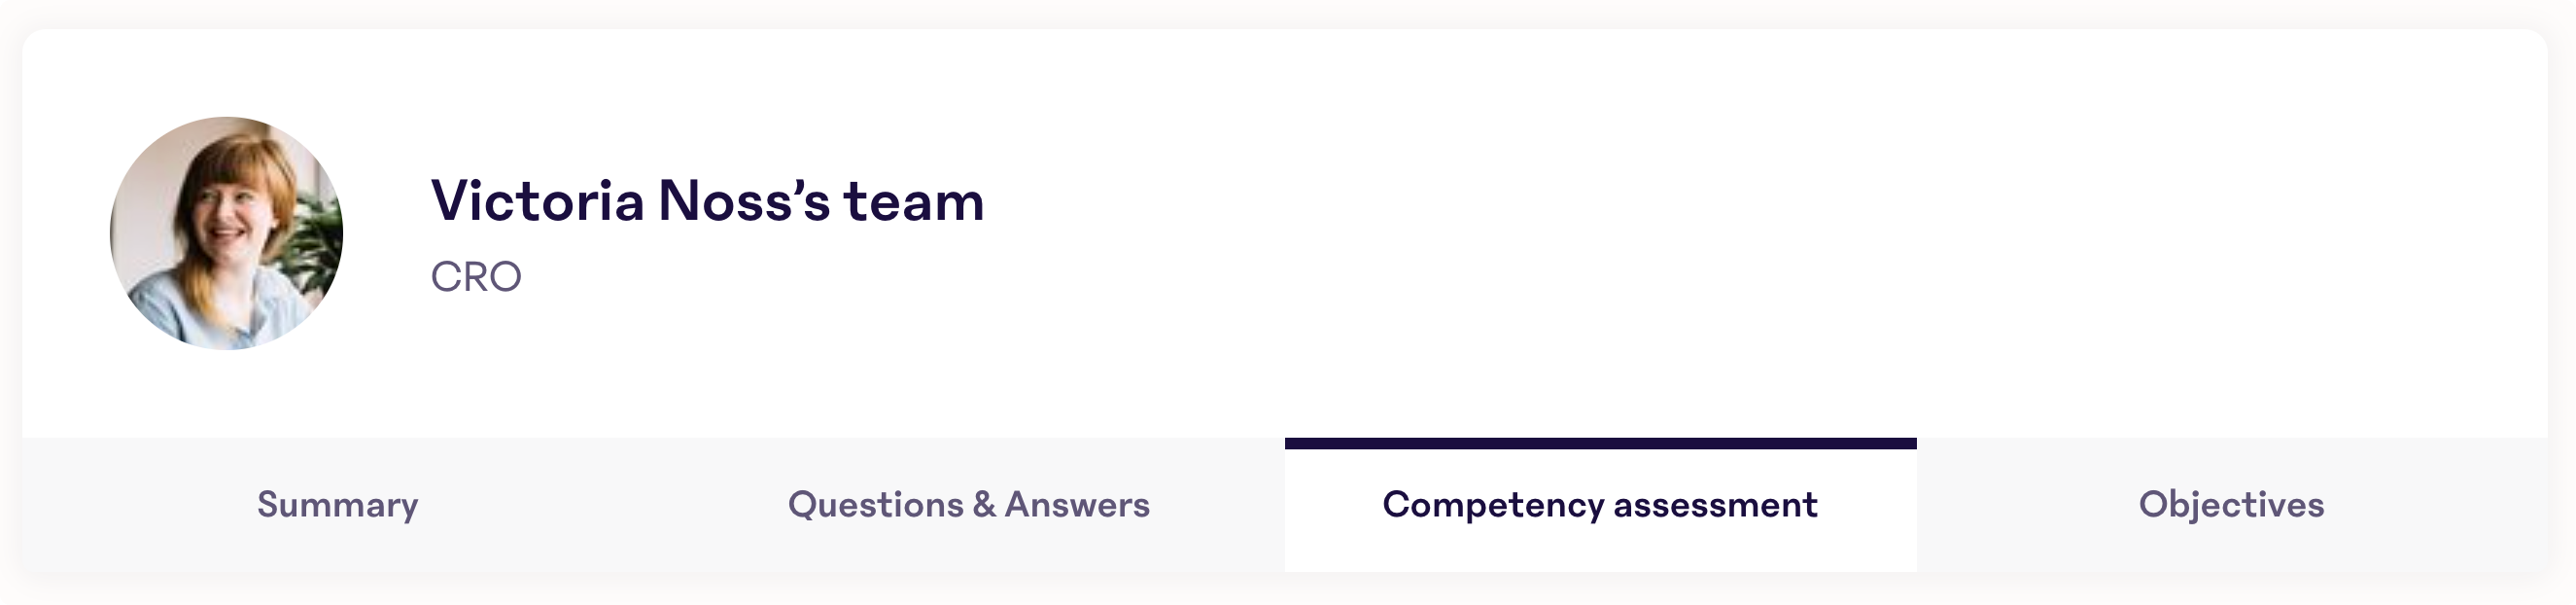 BSR-Results-Competency-Assessment-Tab.png